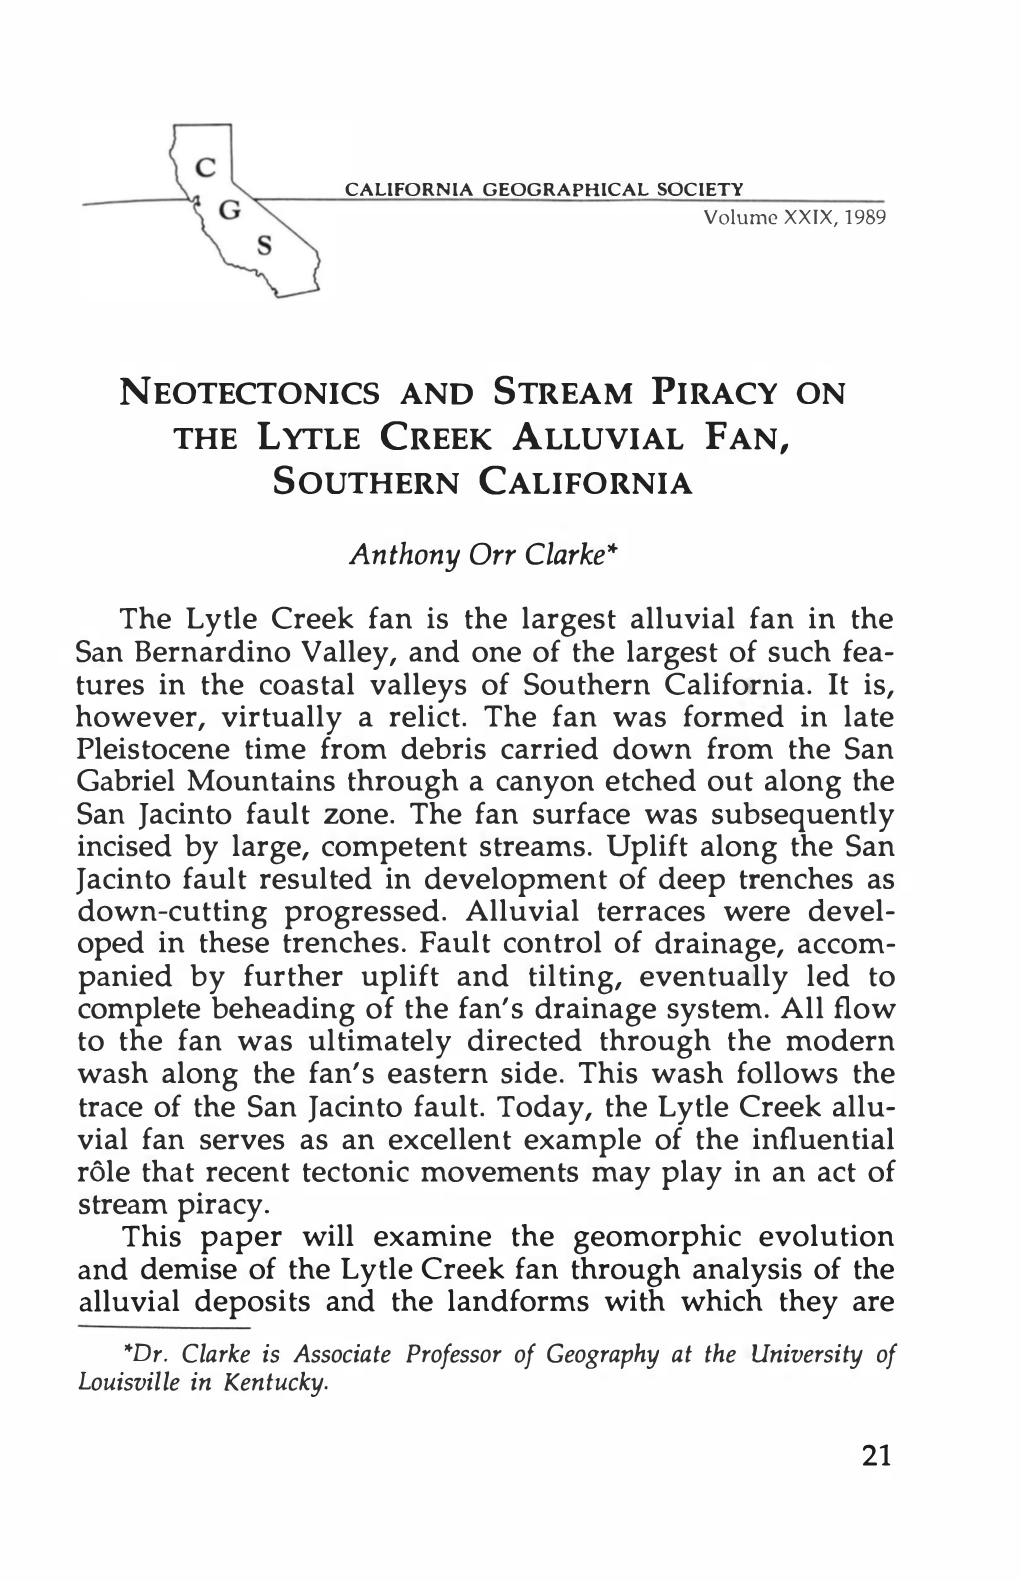 Neotectonics and Stream Piracy on the Lytle Creek Alluvial Fan, Southern California